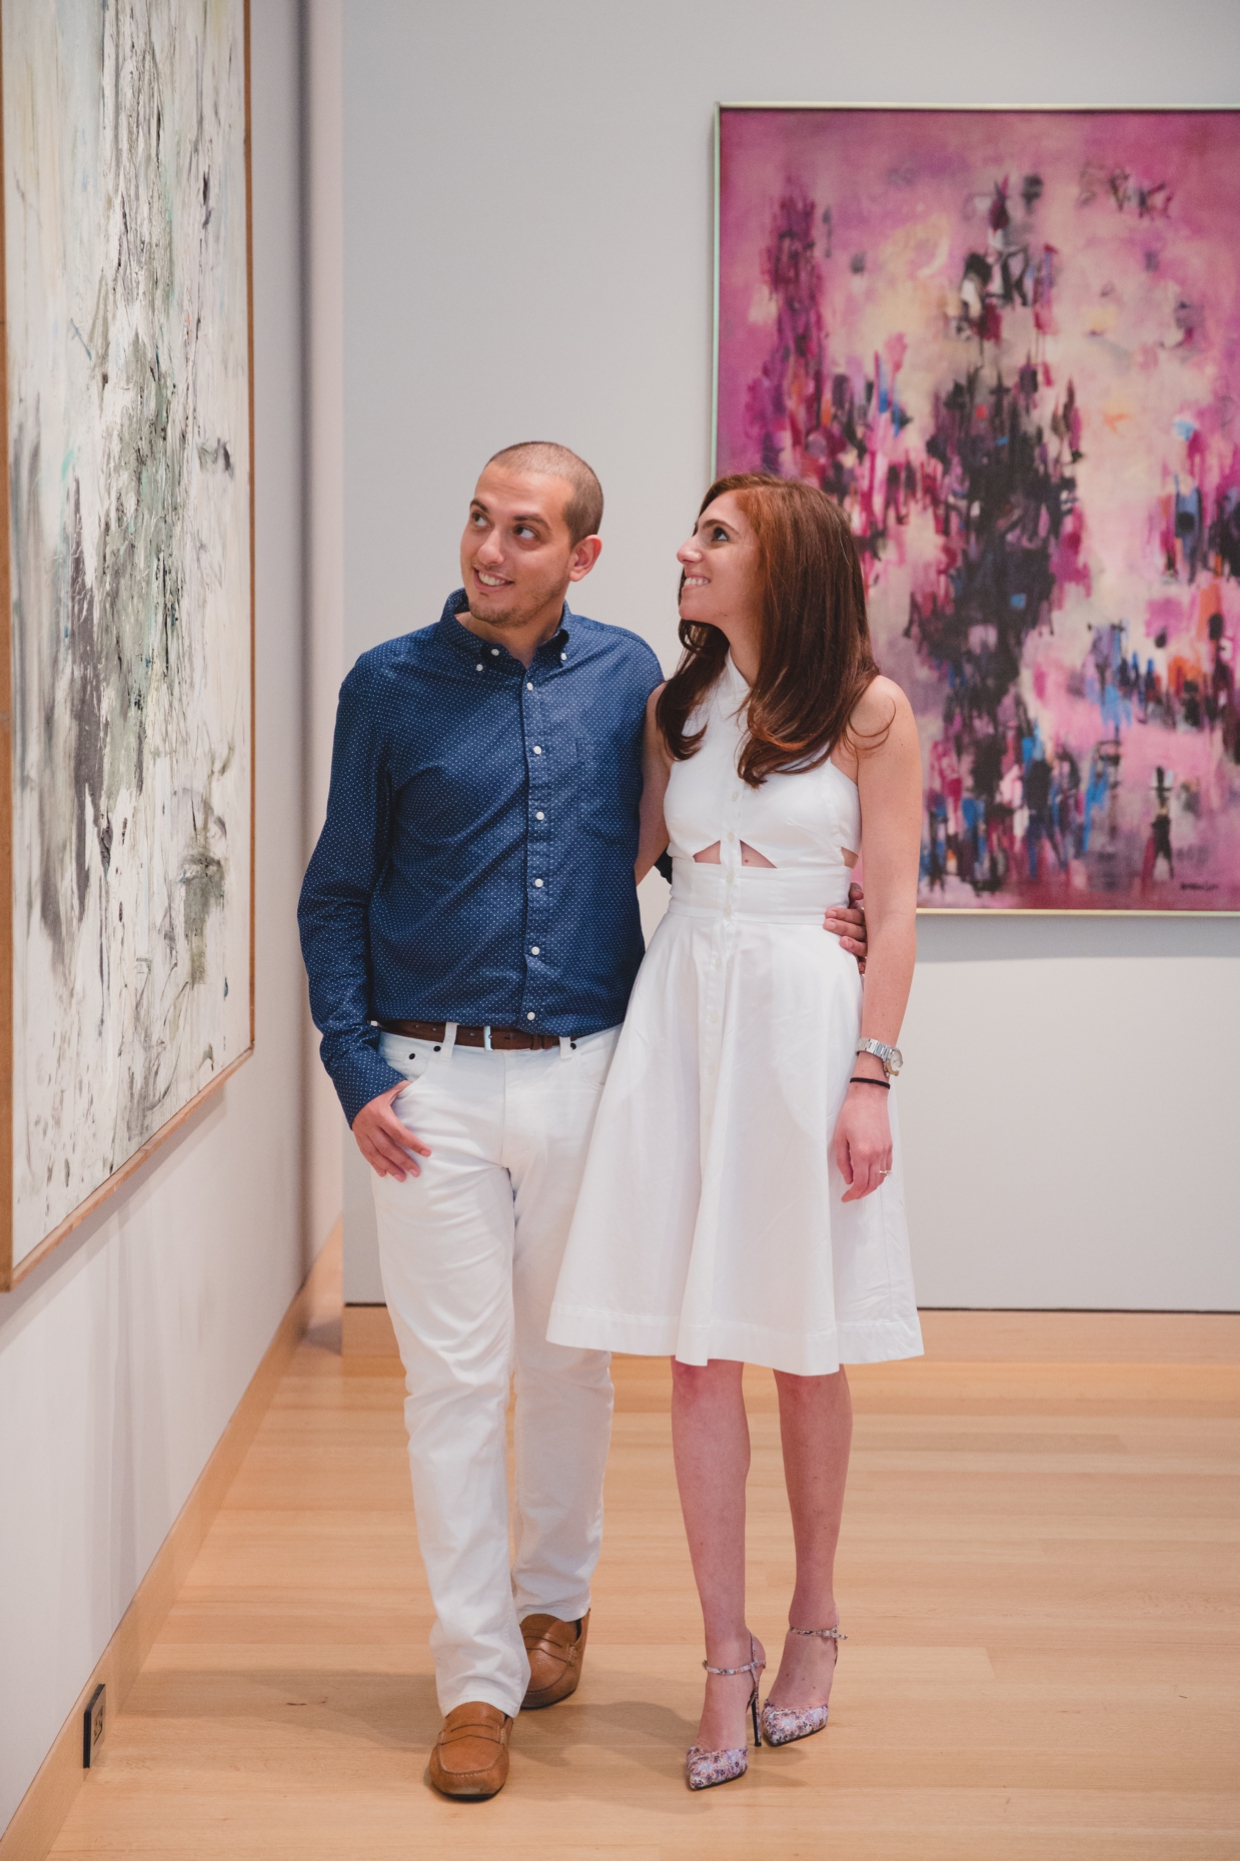 A sweet and relaxed photograph of a couple looking at art work during their engagement session at the Boston Museum of Fine Arts